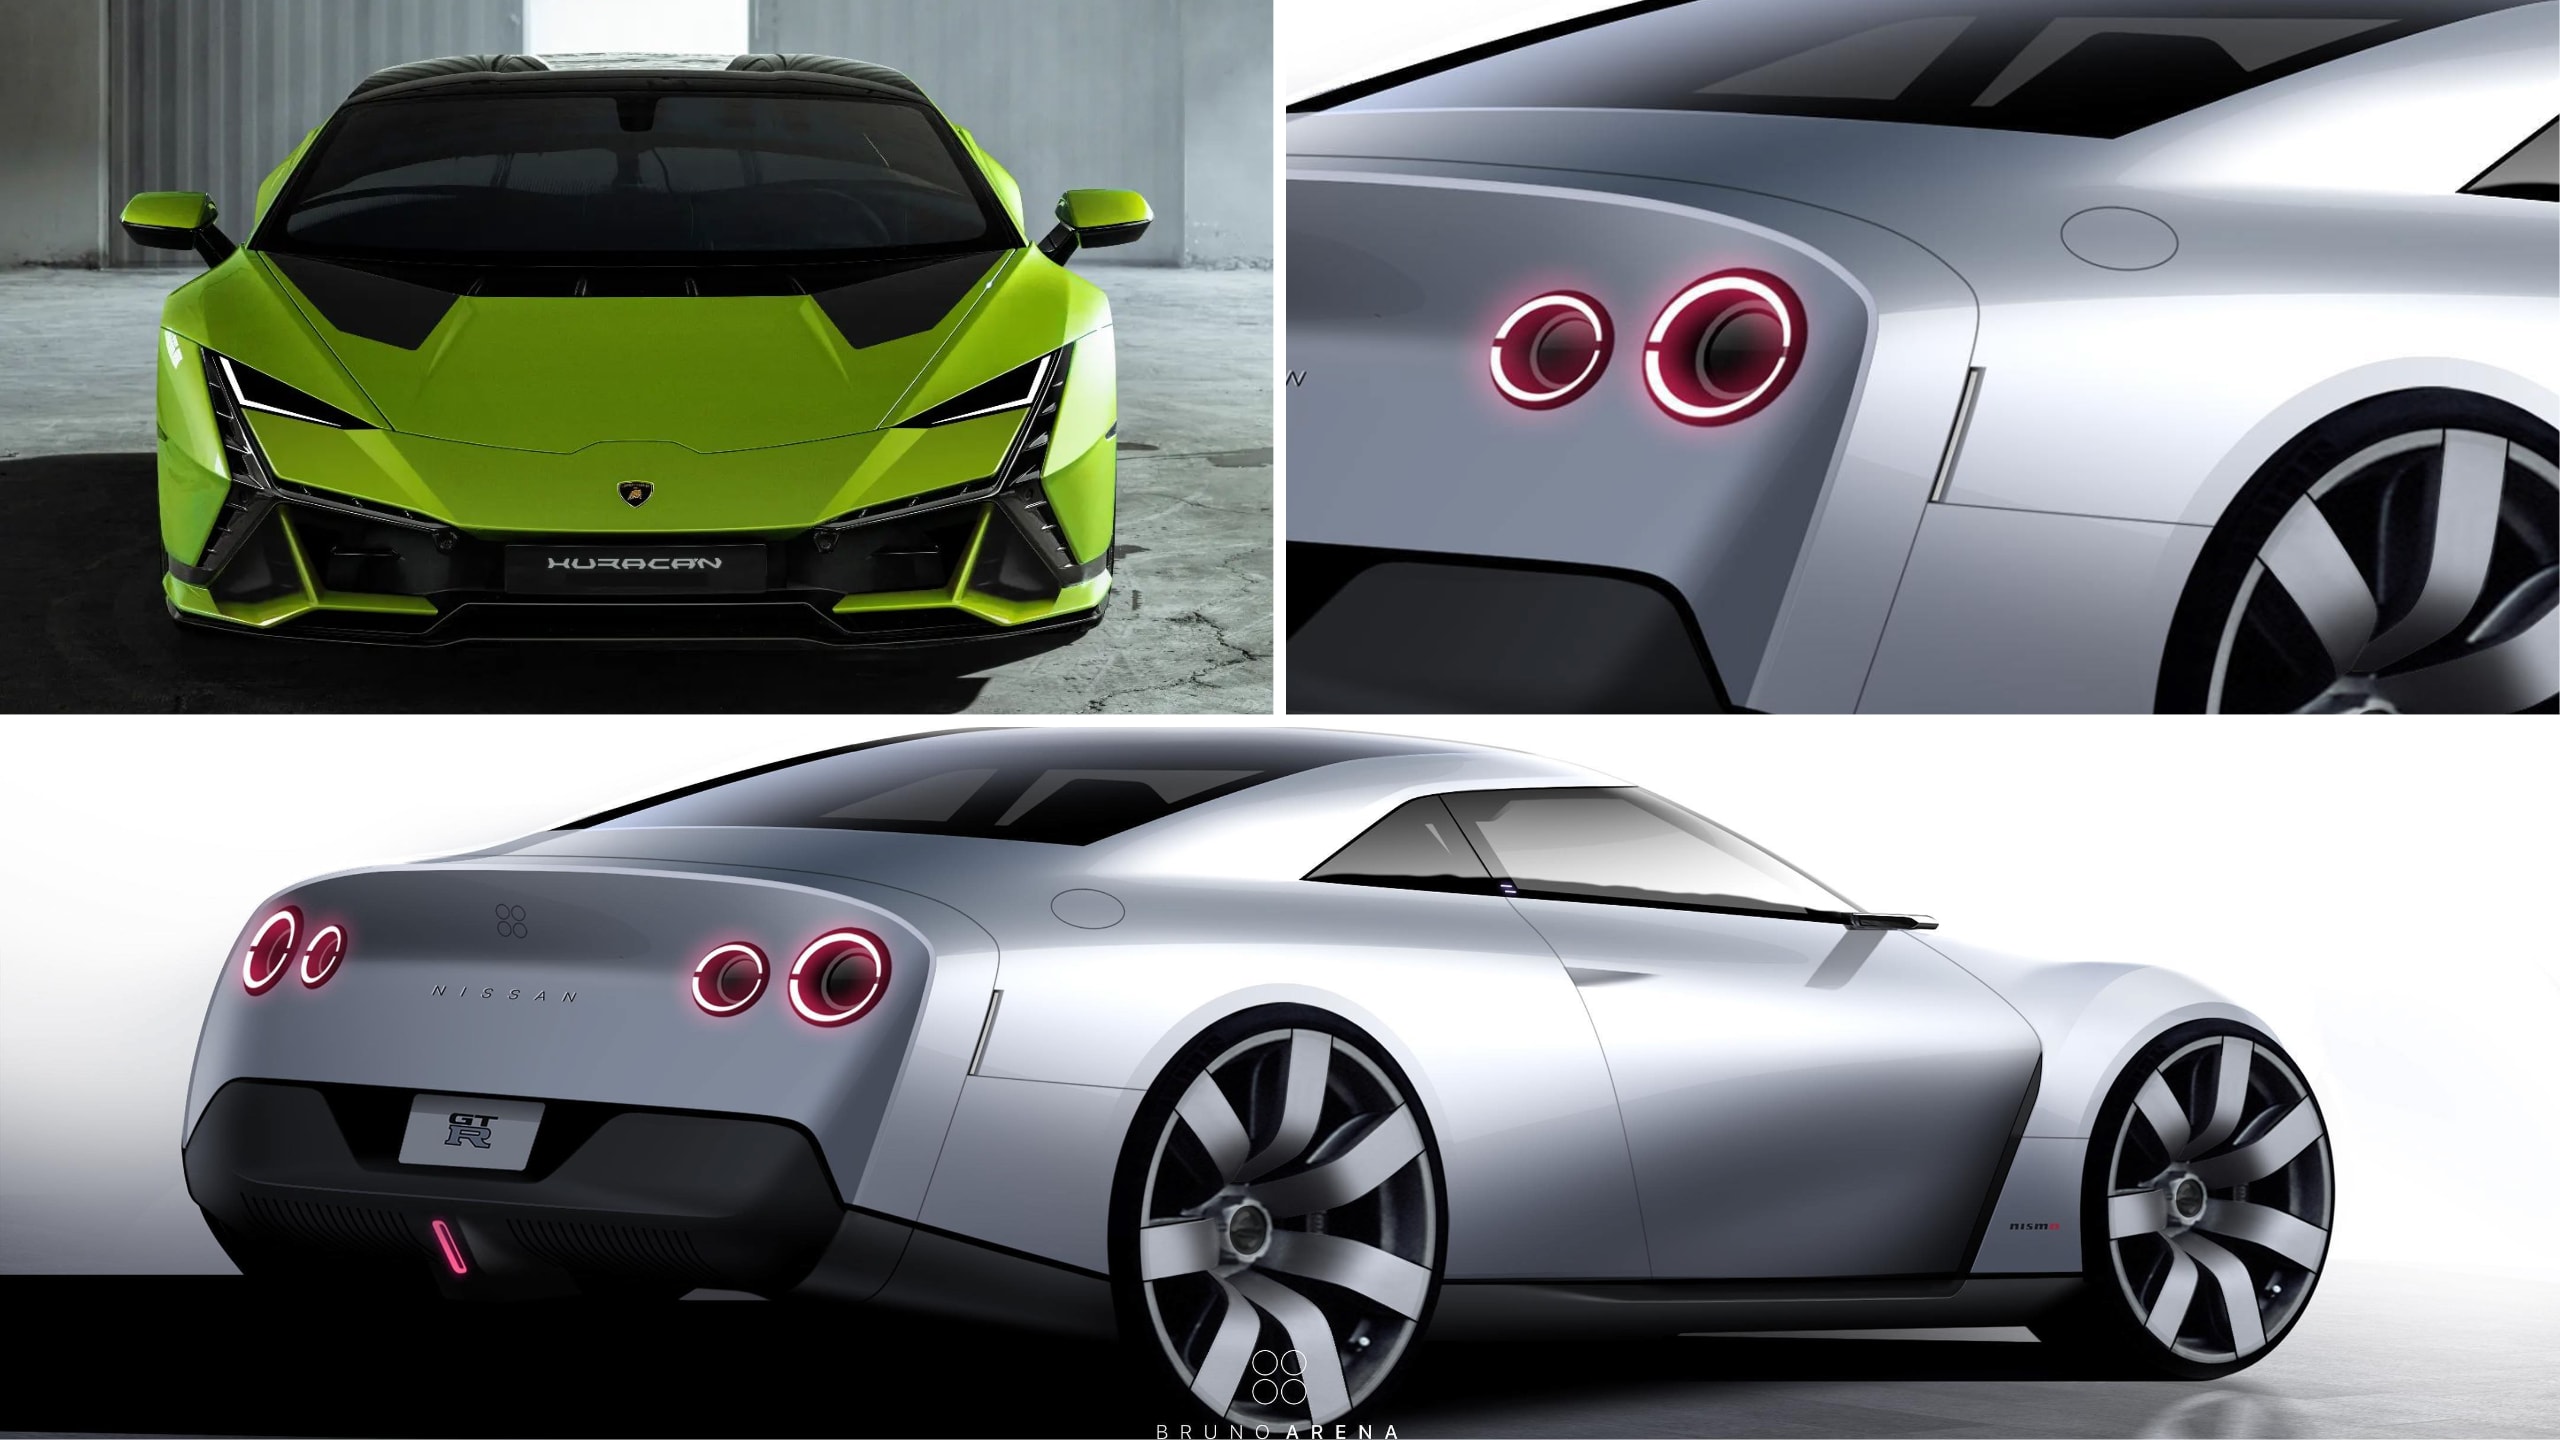 What If The 2025 Lambo Huracan And Next Nissan Gt R Shared An Uncanny